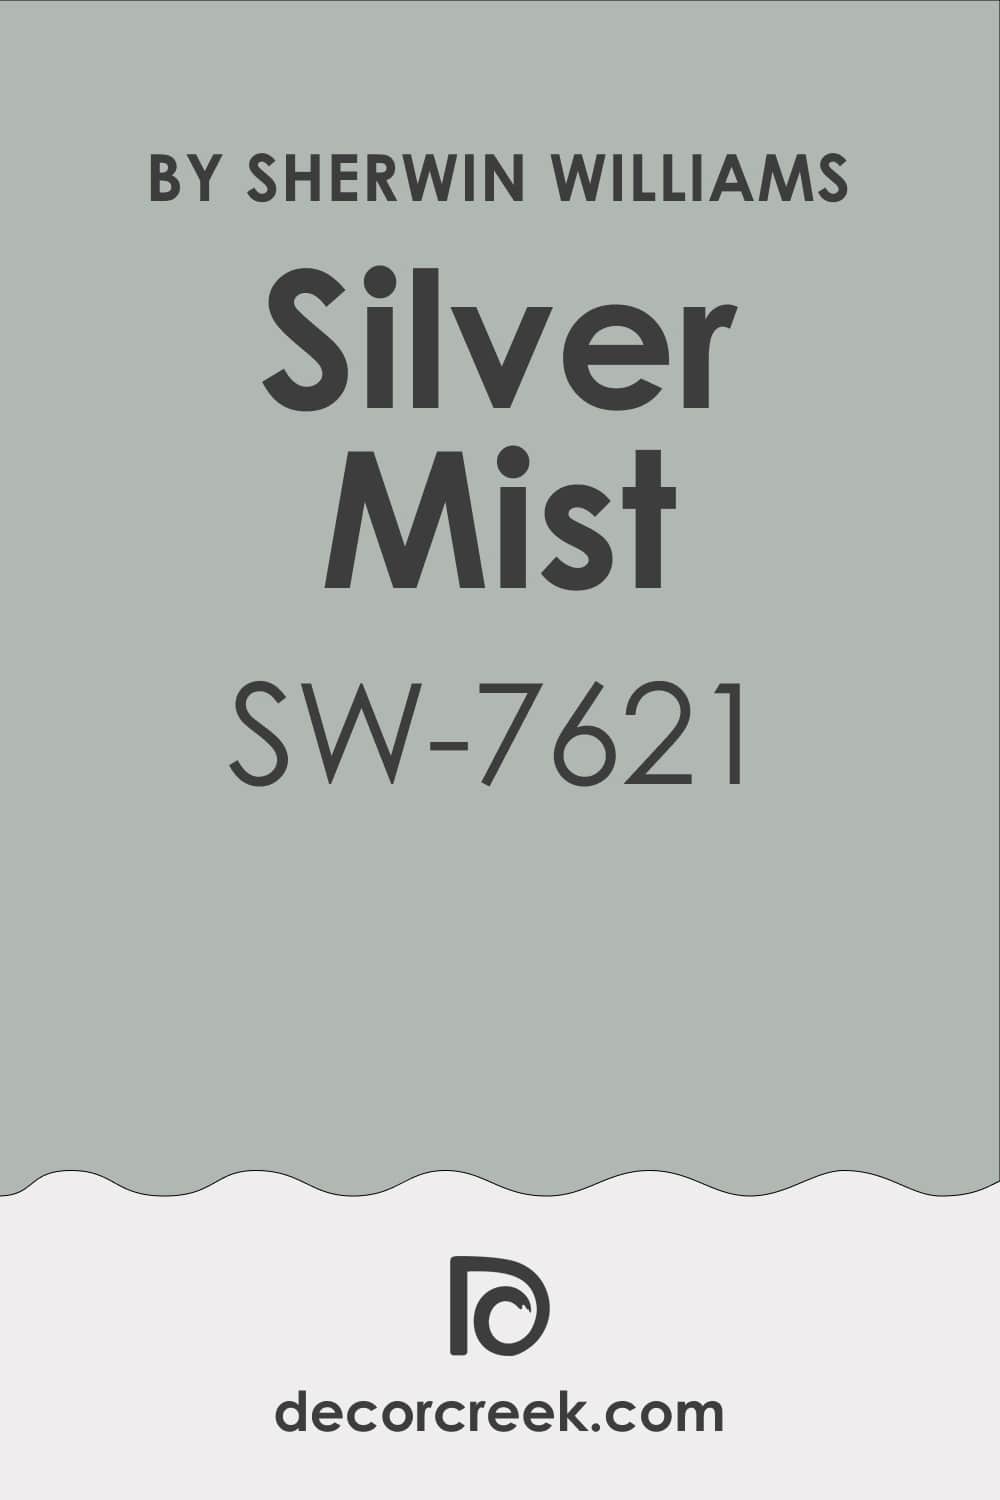 What Color Is Silver Mist SW-7621?